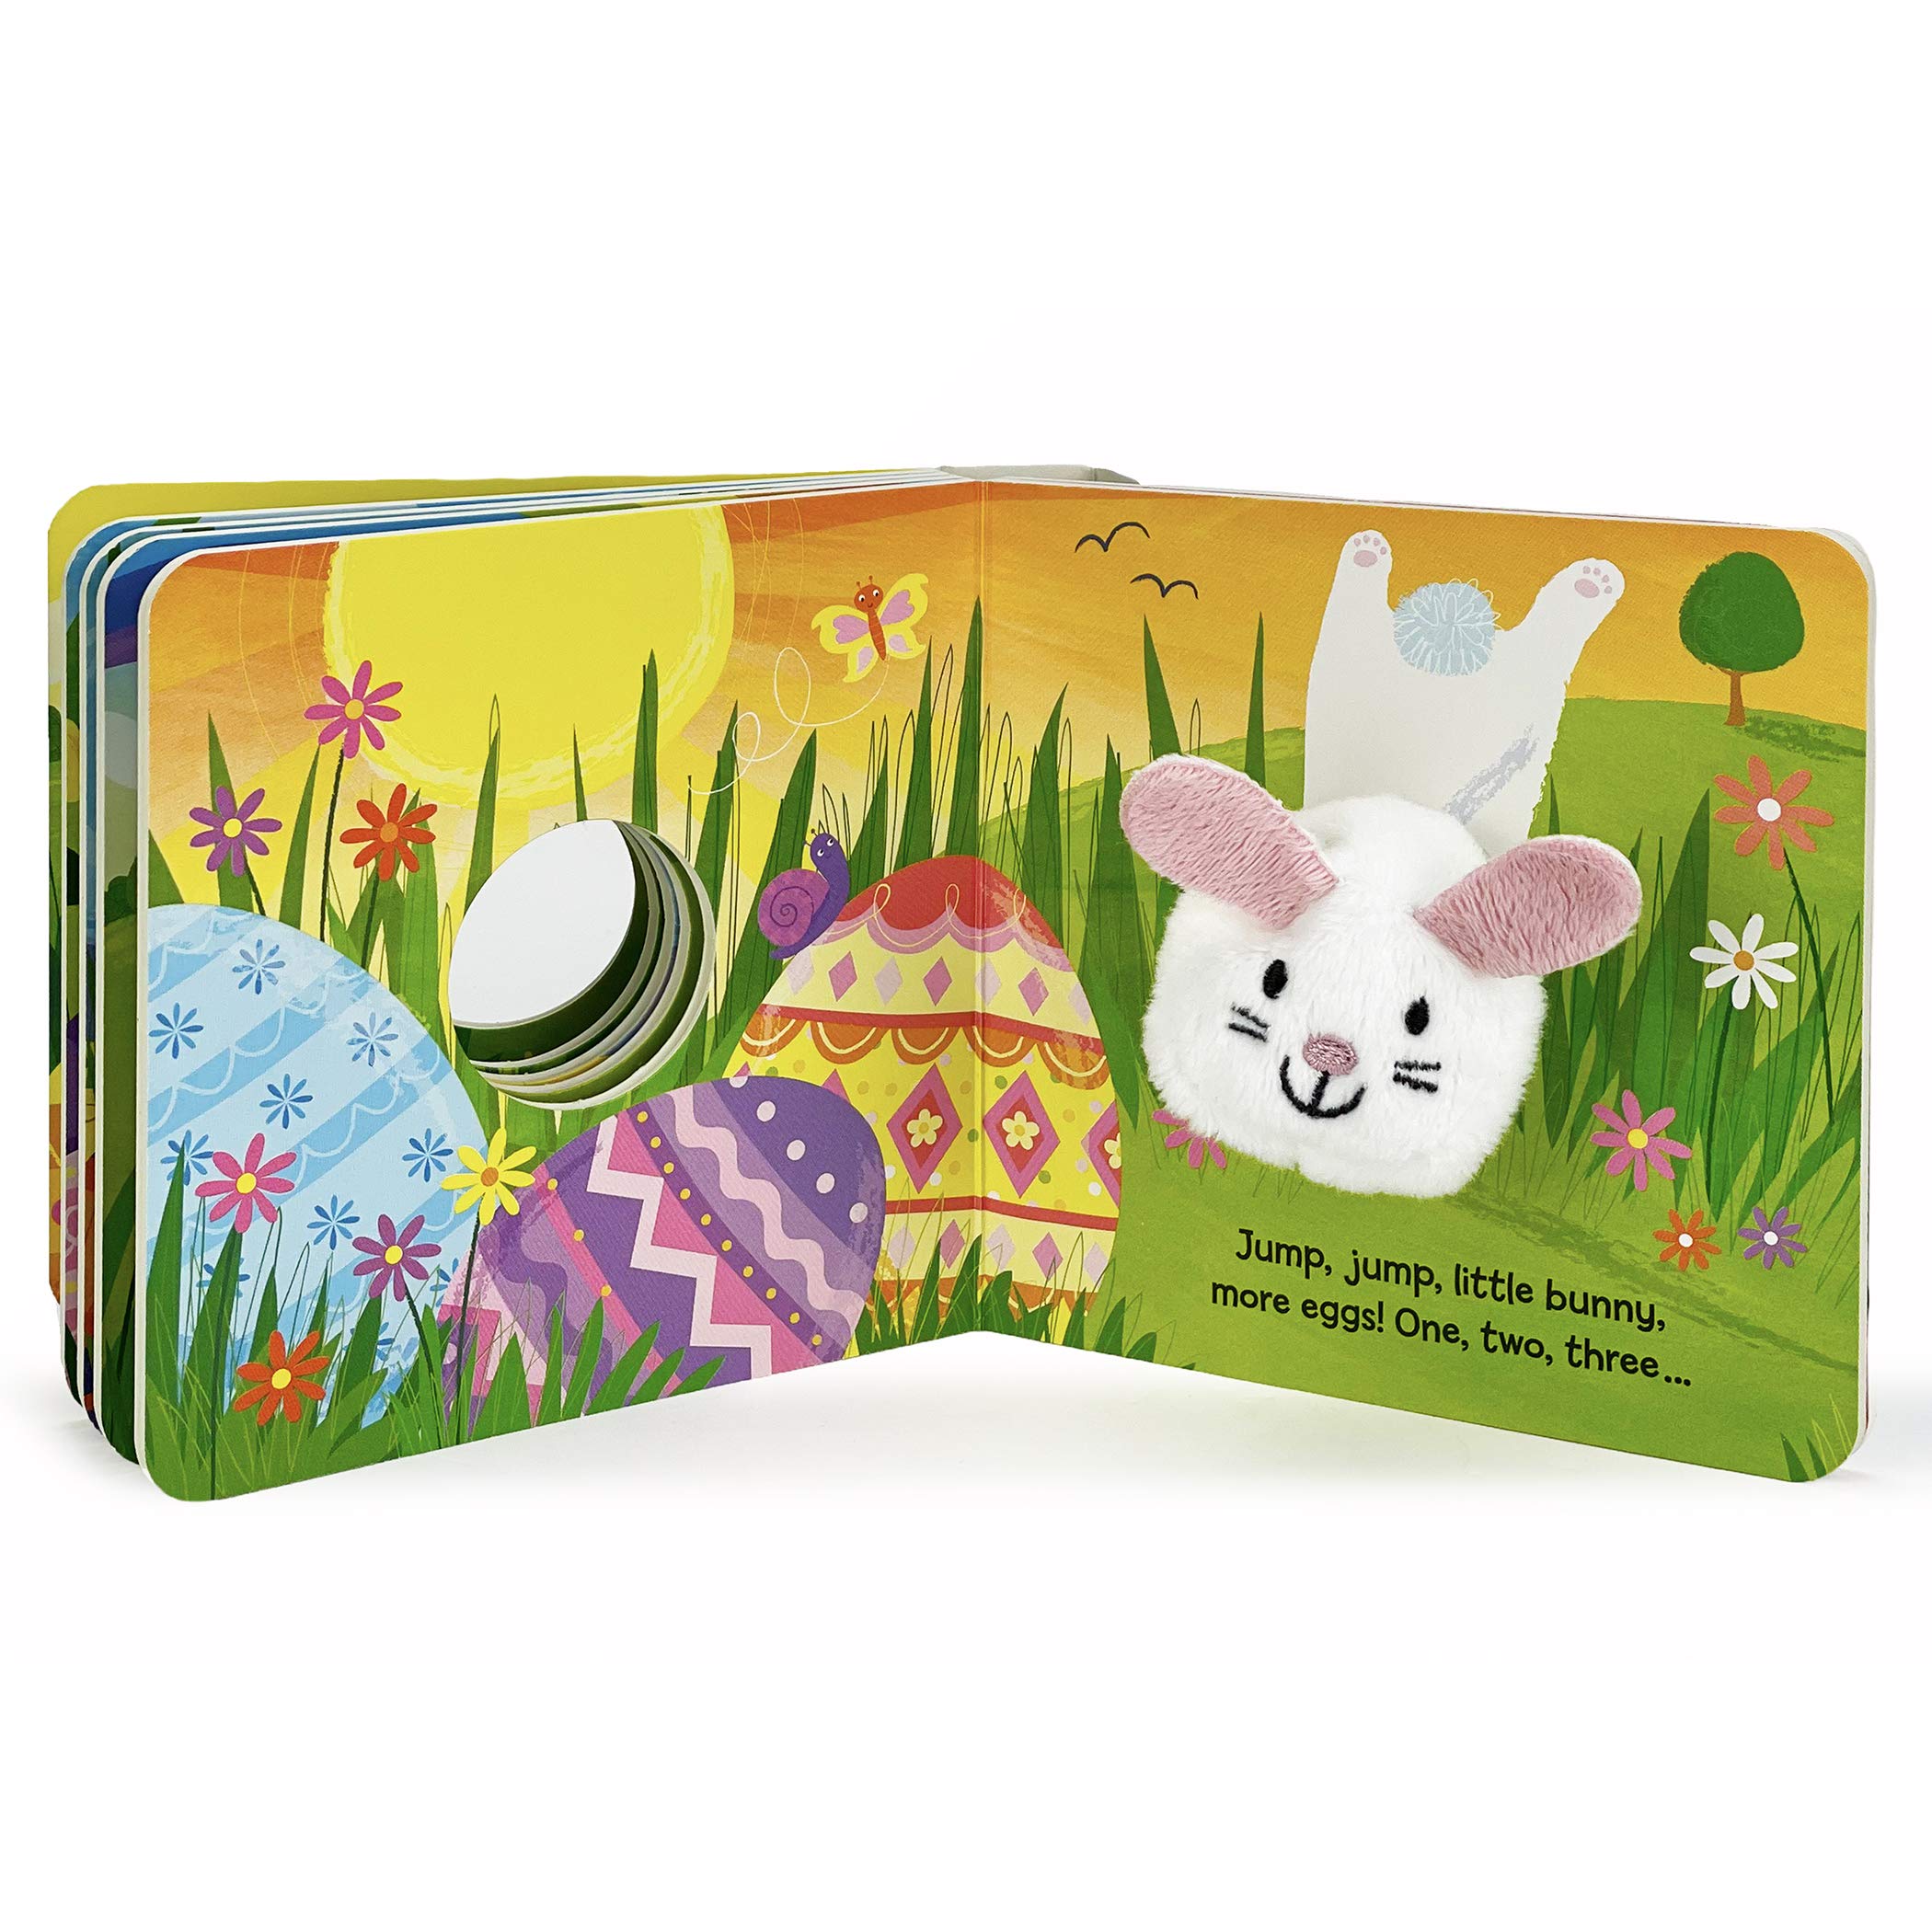 Hippity, Hoppity, Little Bunny - Finger Puppet Board Book for Easter Basket Gifts or Stuffer Ages 0-3